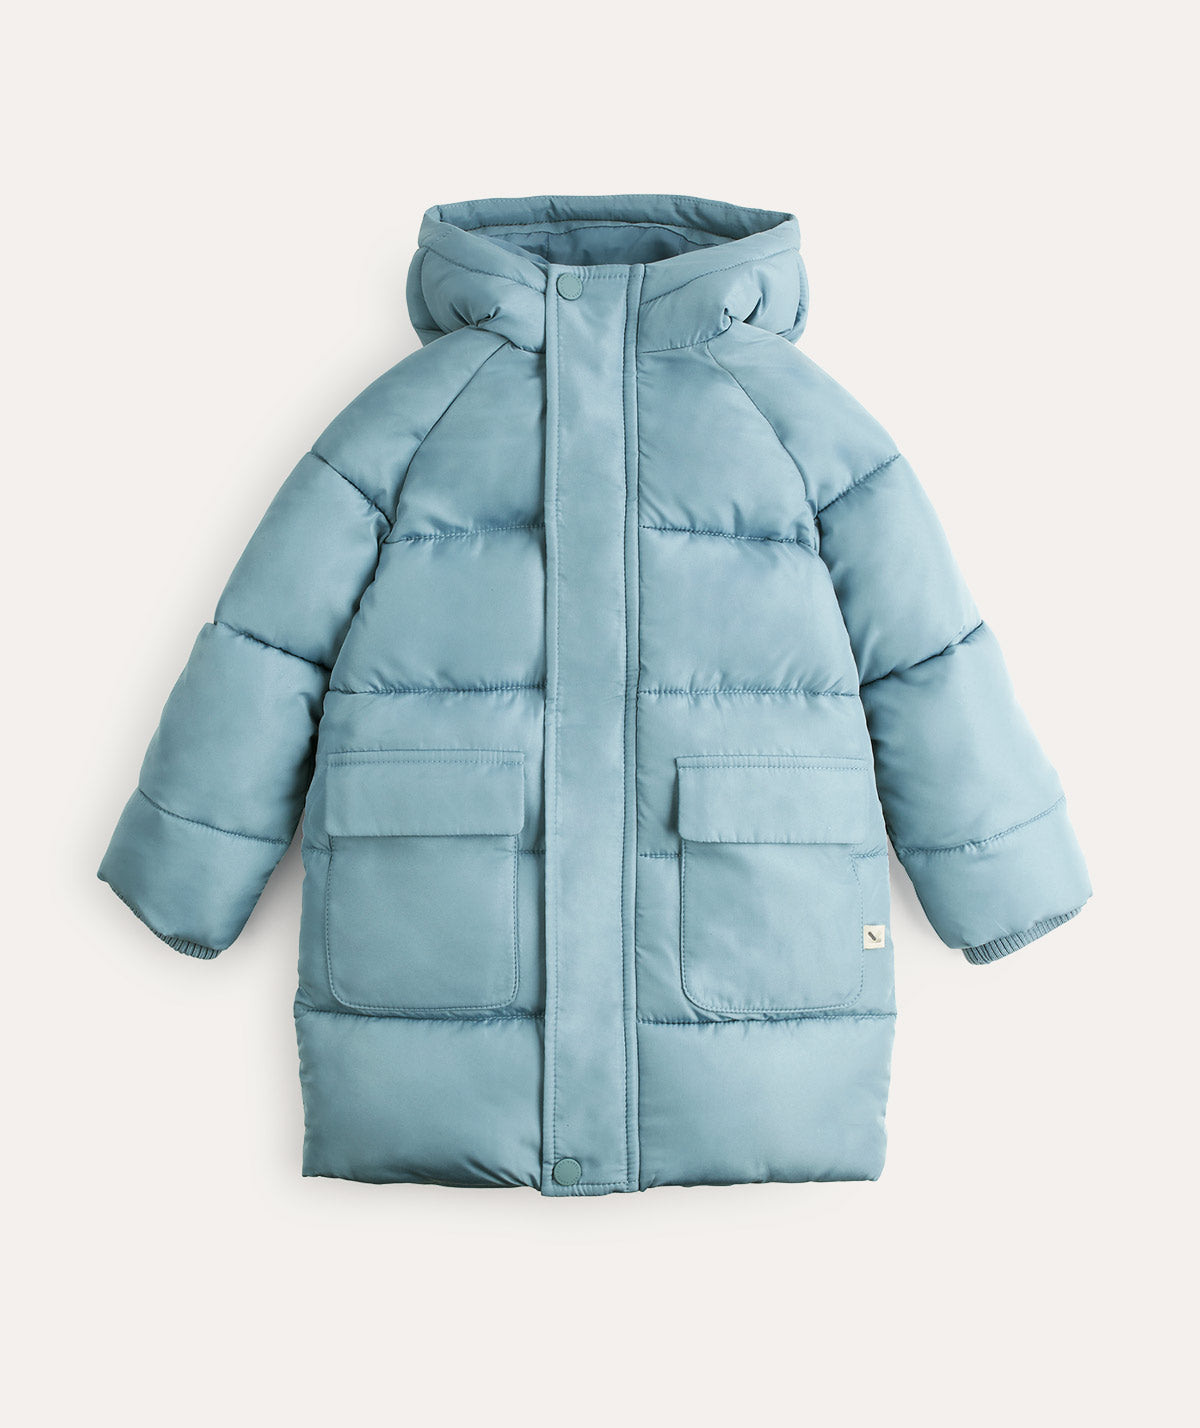 Buy the Blue KIDLY Label Puffer Coat | KIDLY